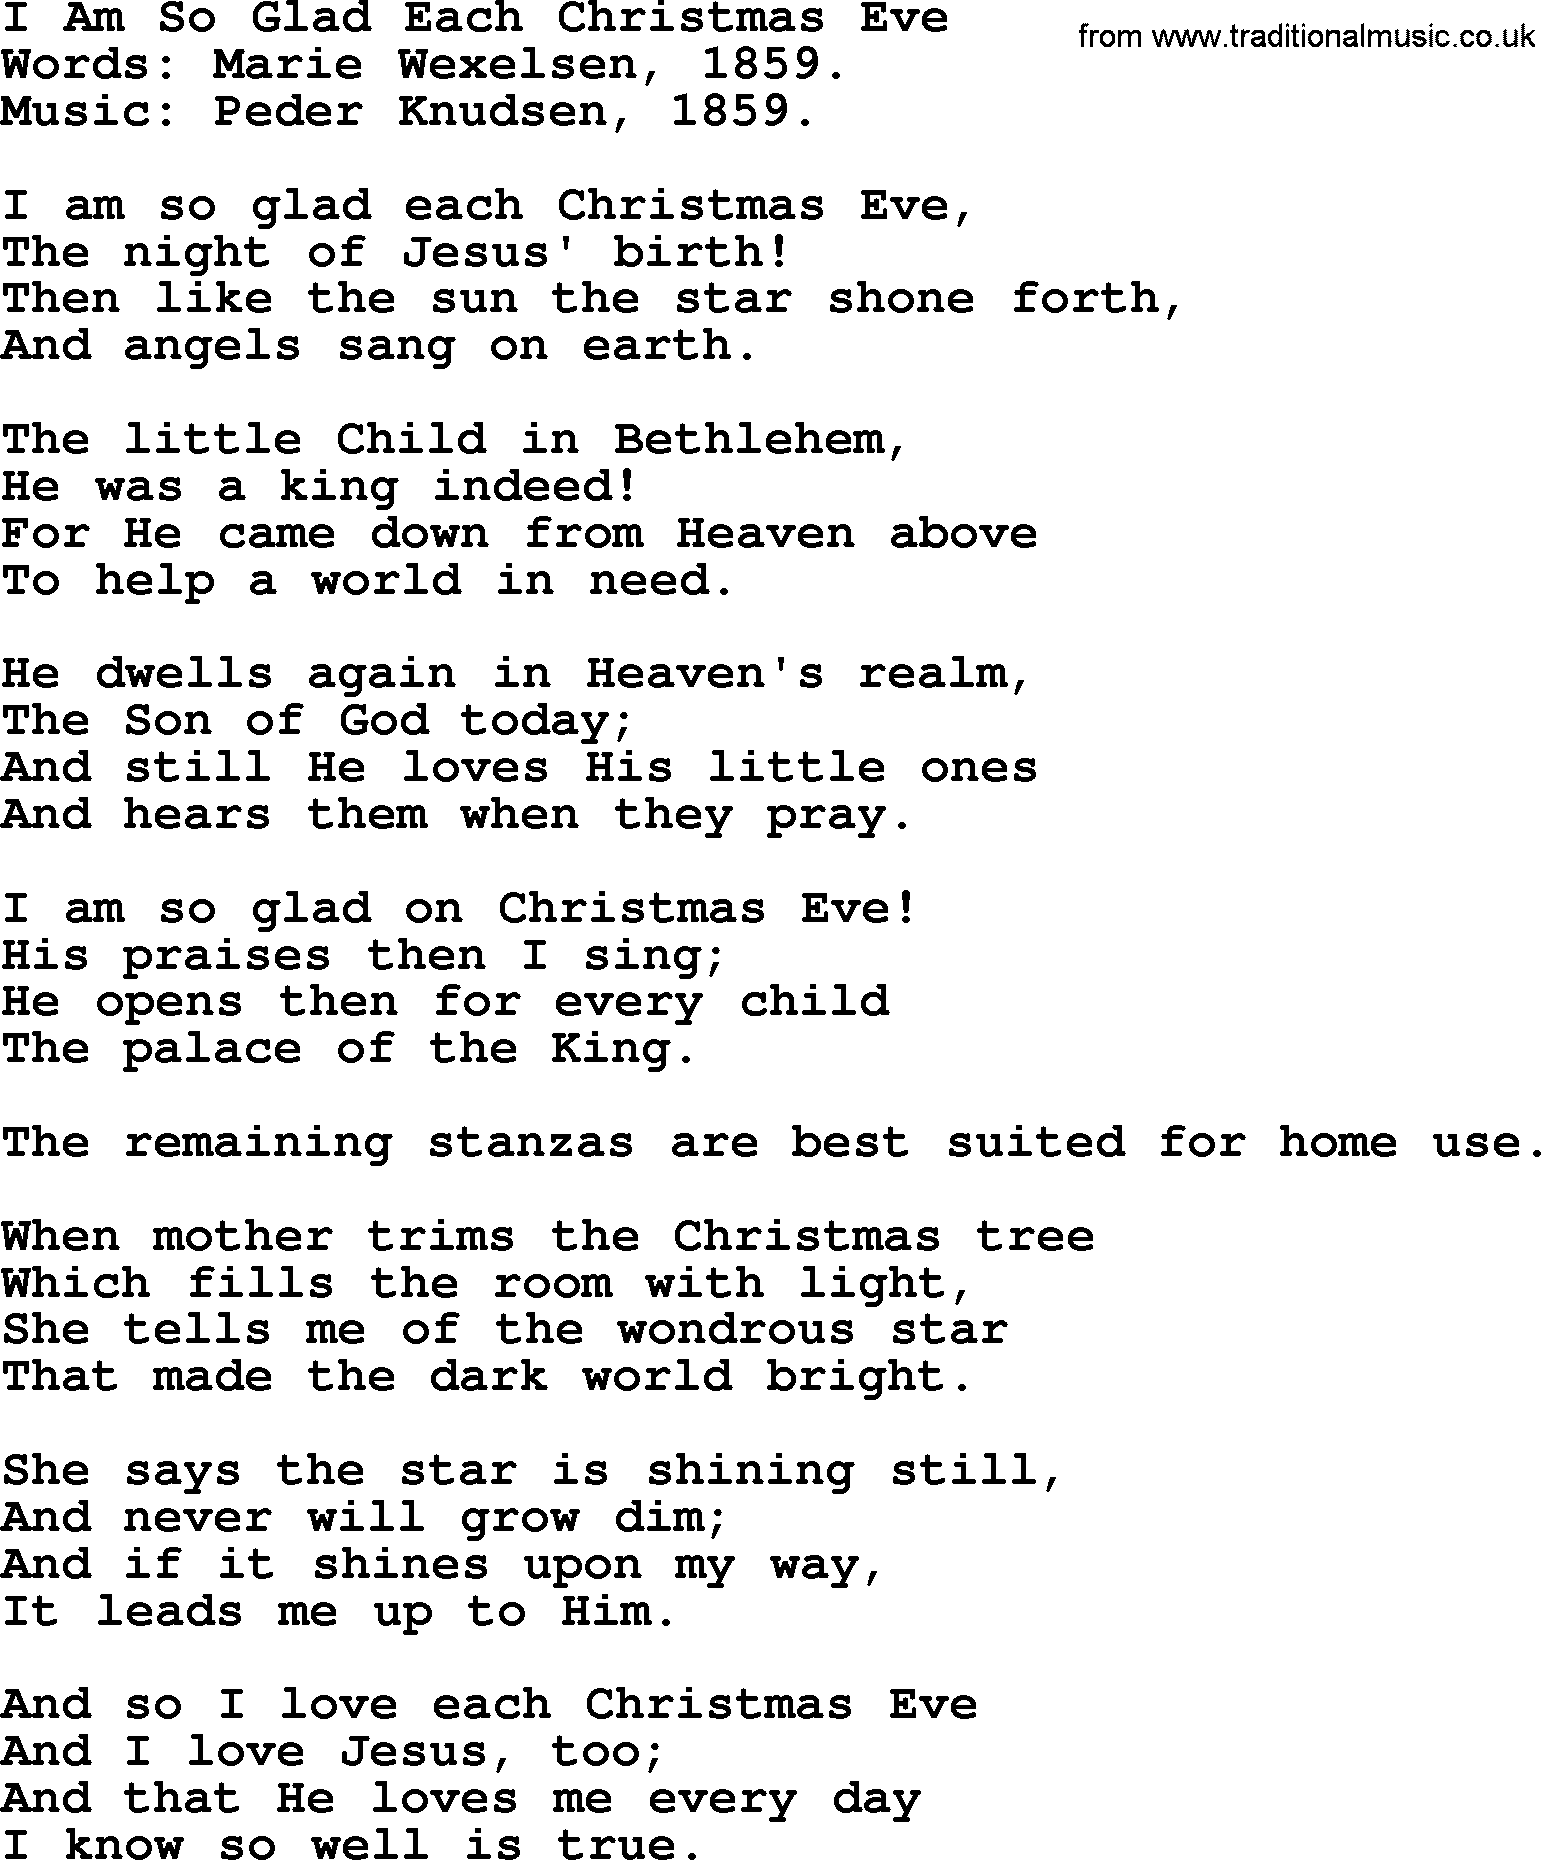 Christmas Hymns, Carols and Songs, title: I Am So Glad Each Christmas Eve - complete lyrics, and PDF